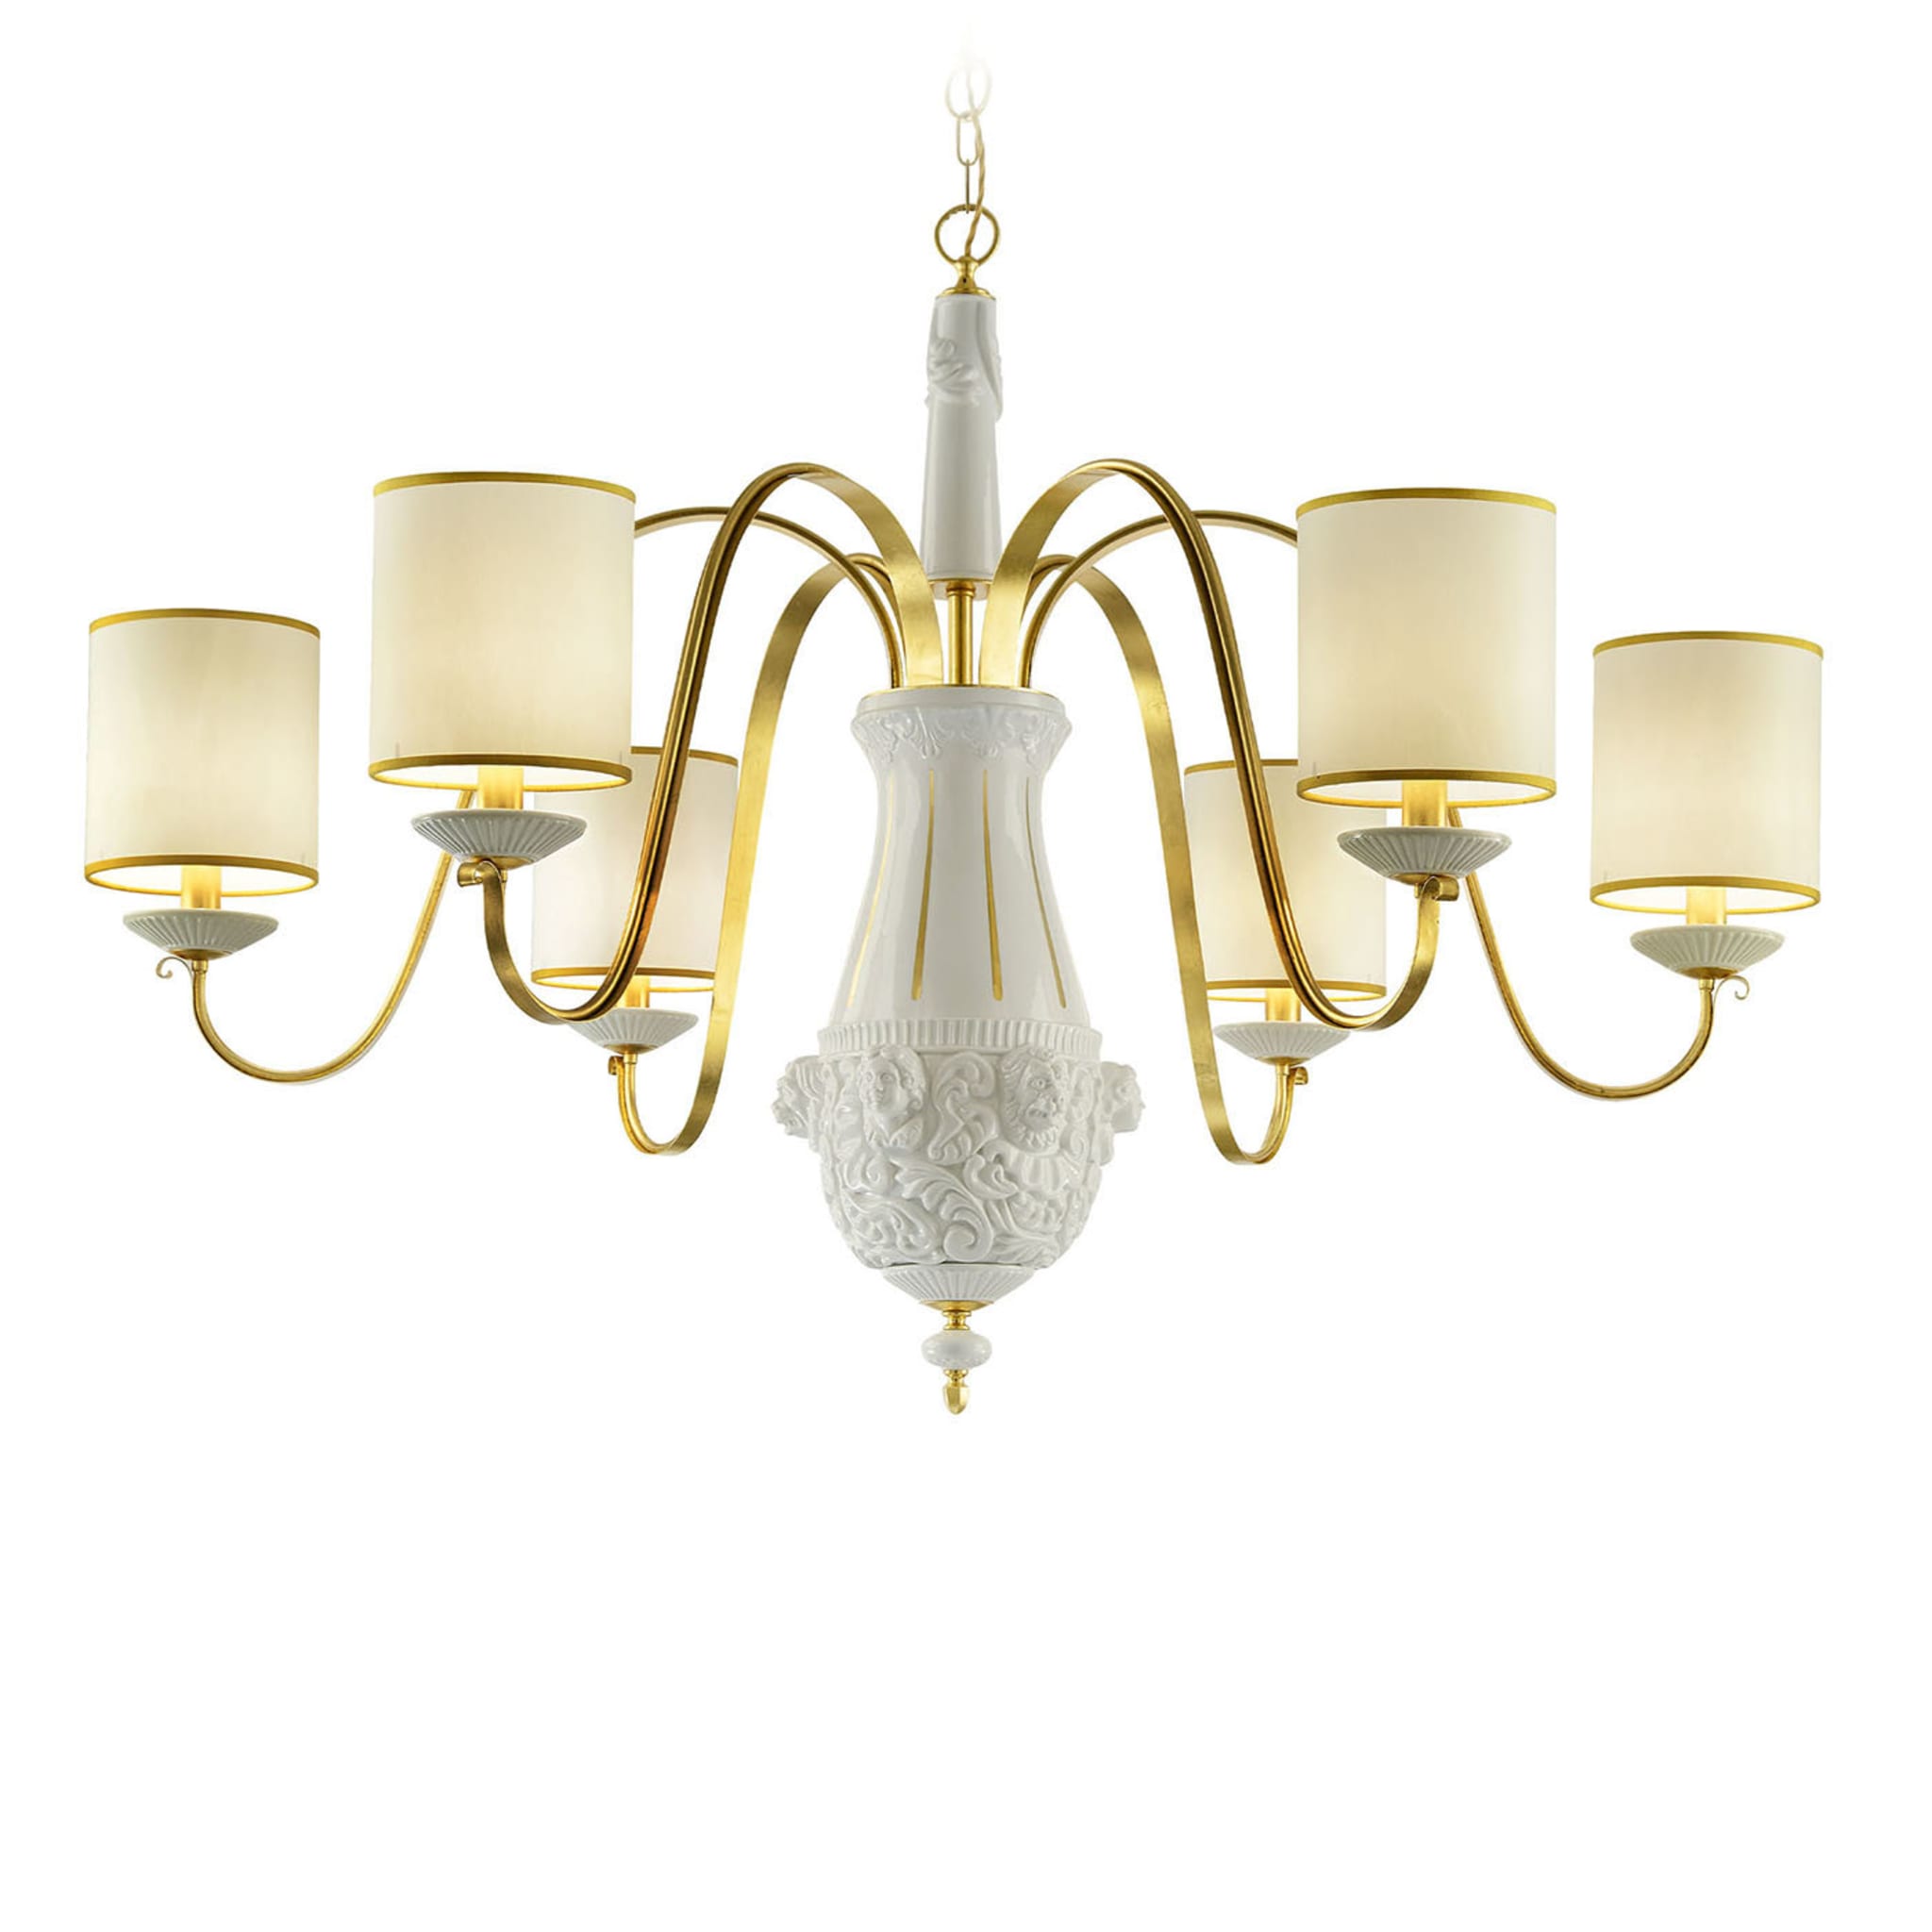 Principe 6-Light Chandelier by Salvatore Spataro and Paolo Barboni - Main view